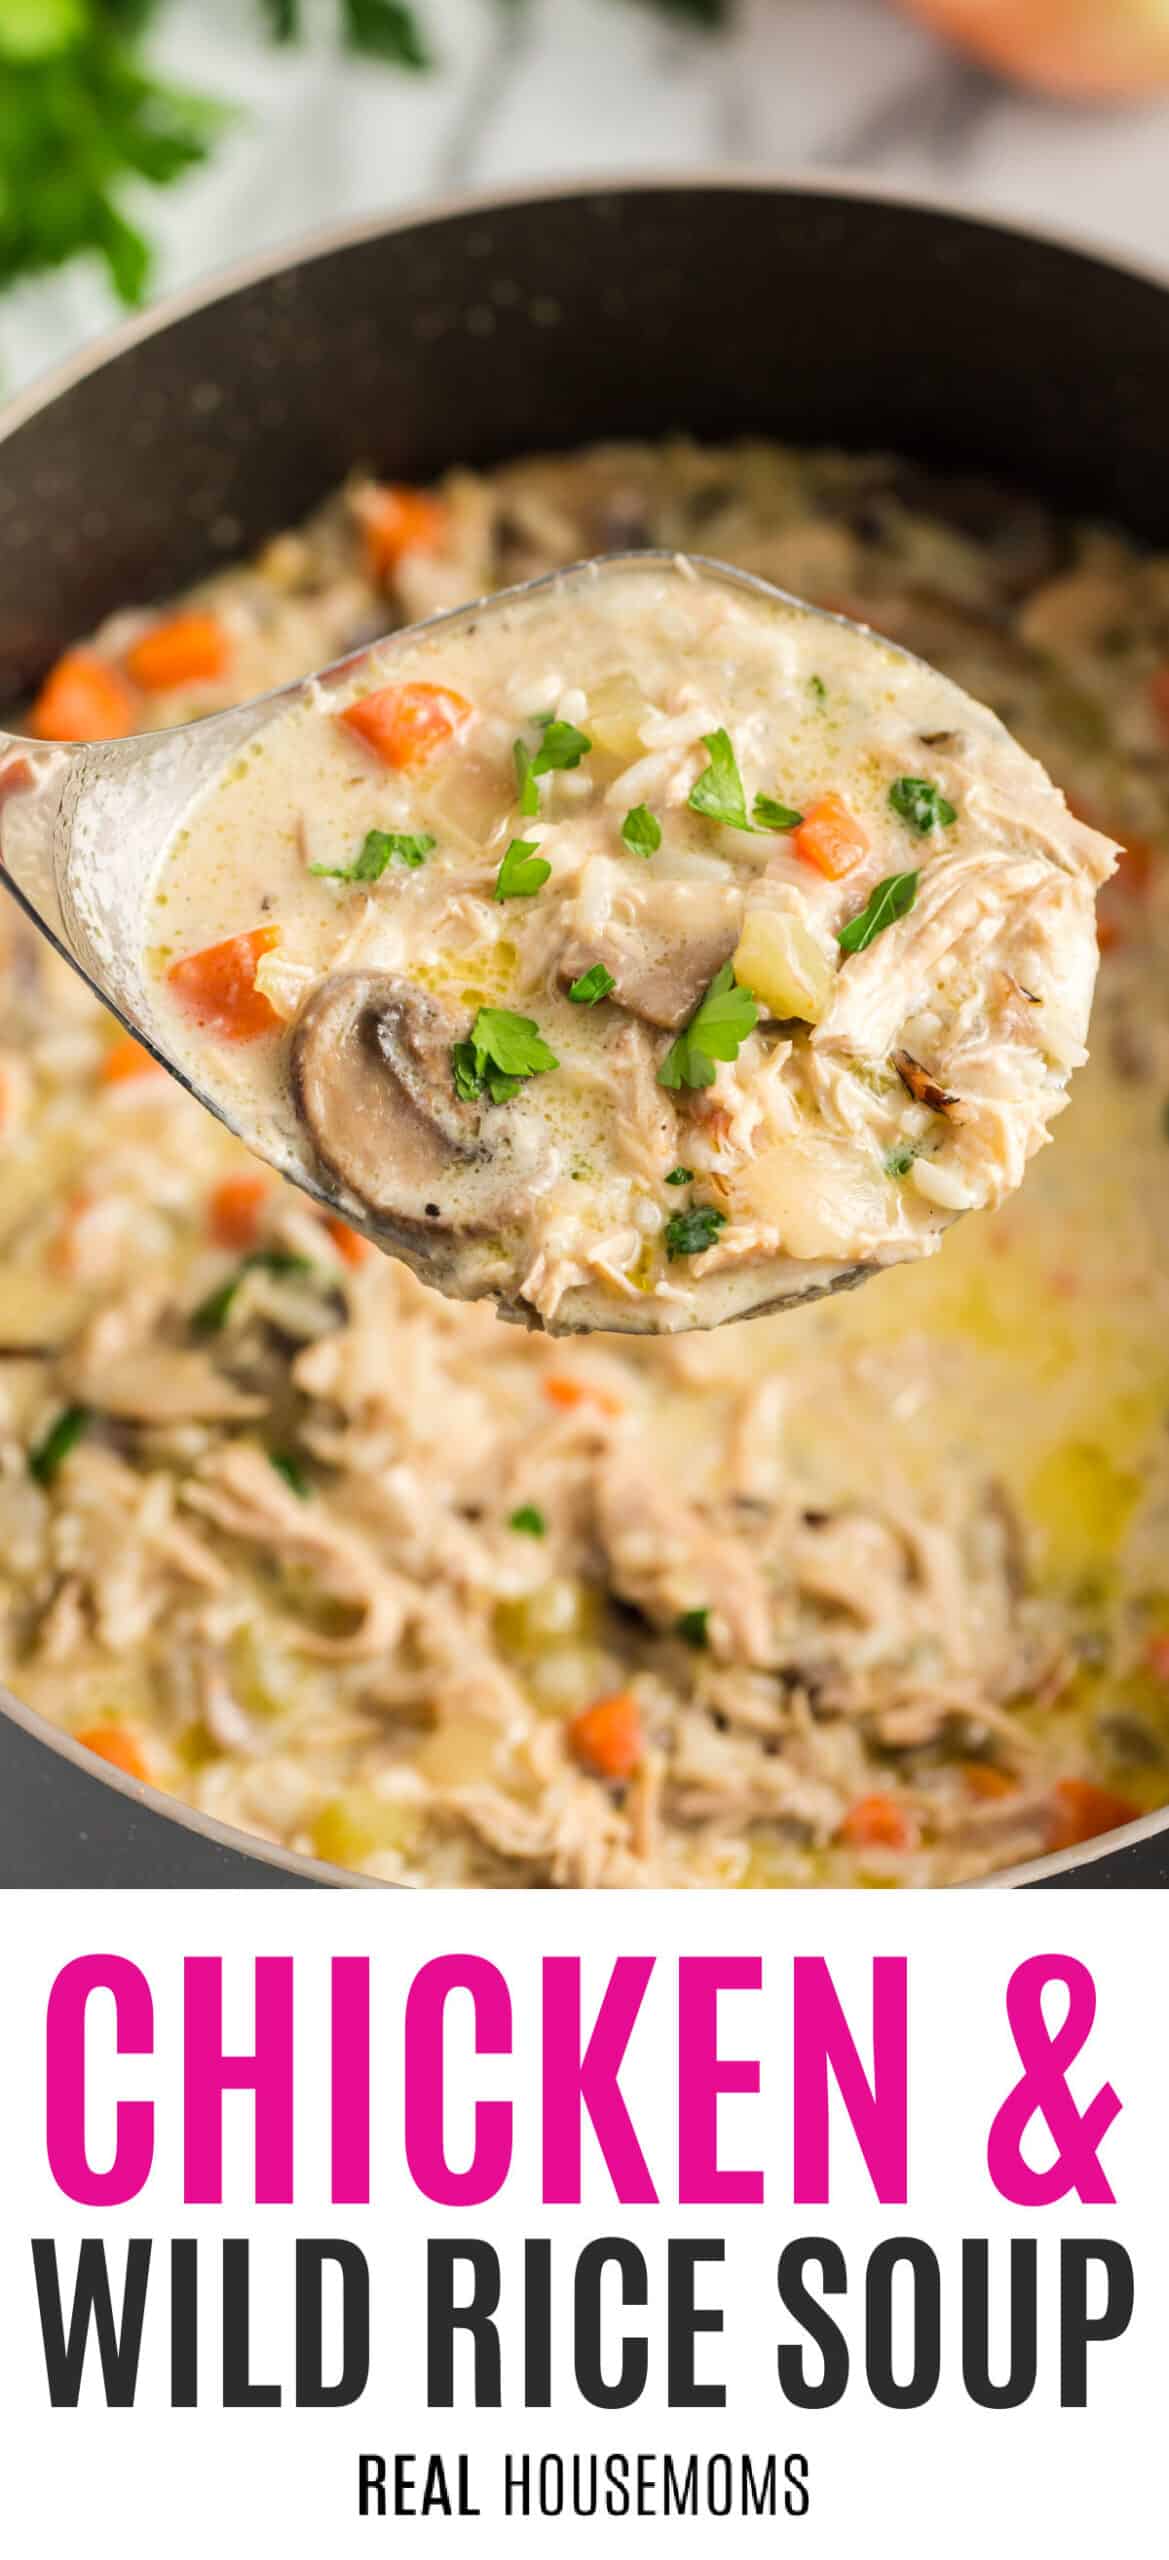 Creamy Chicken and Wild Rice Soup - Tastes Better From Scratch